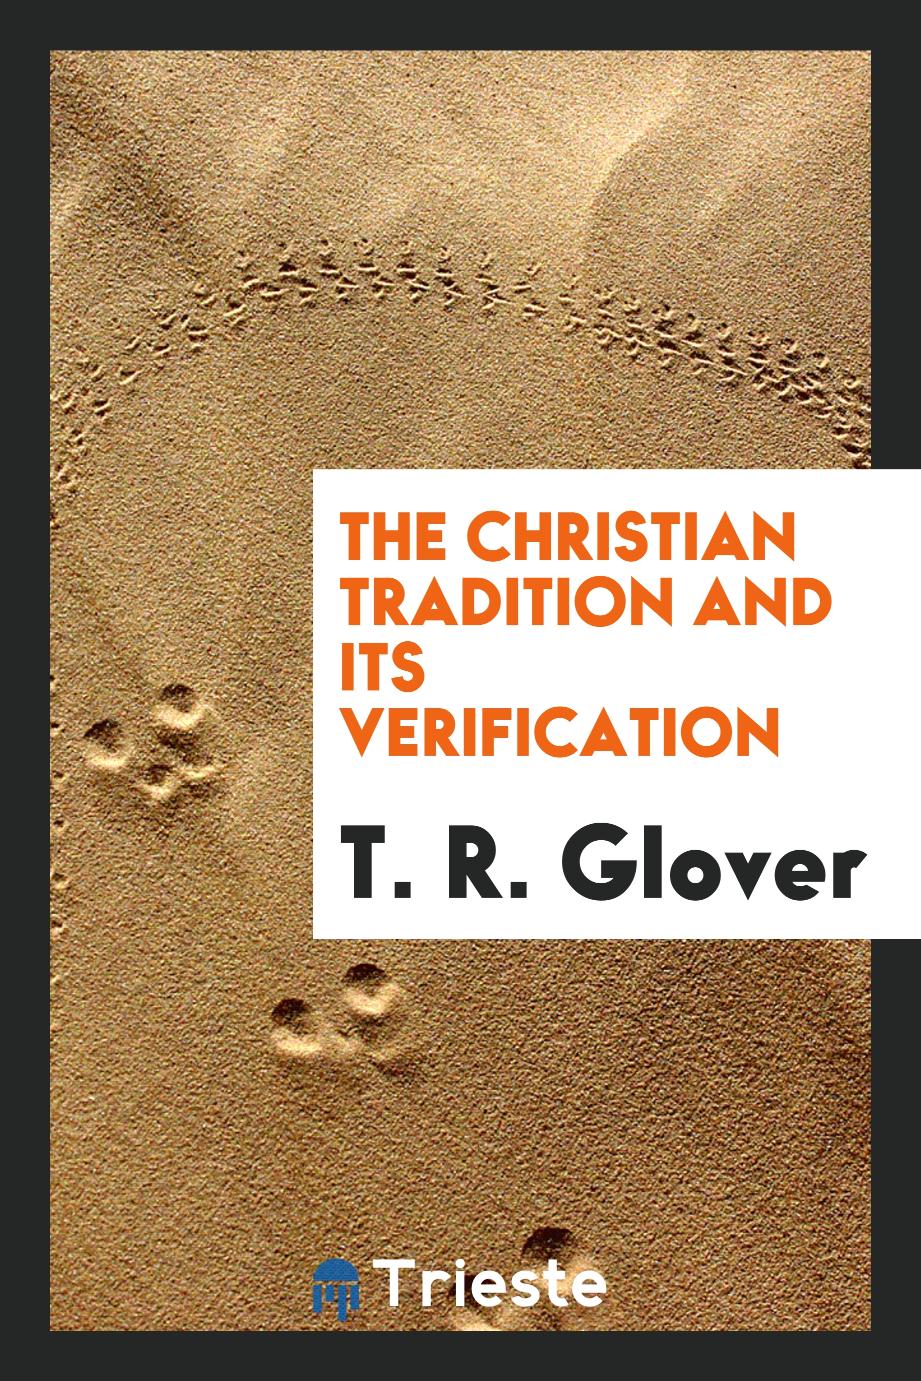 The Christian tradition and its verification